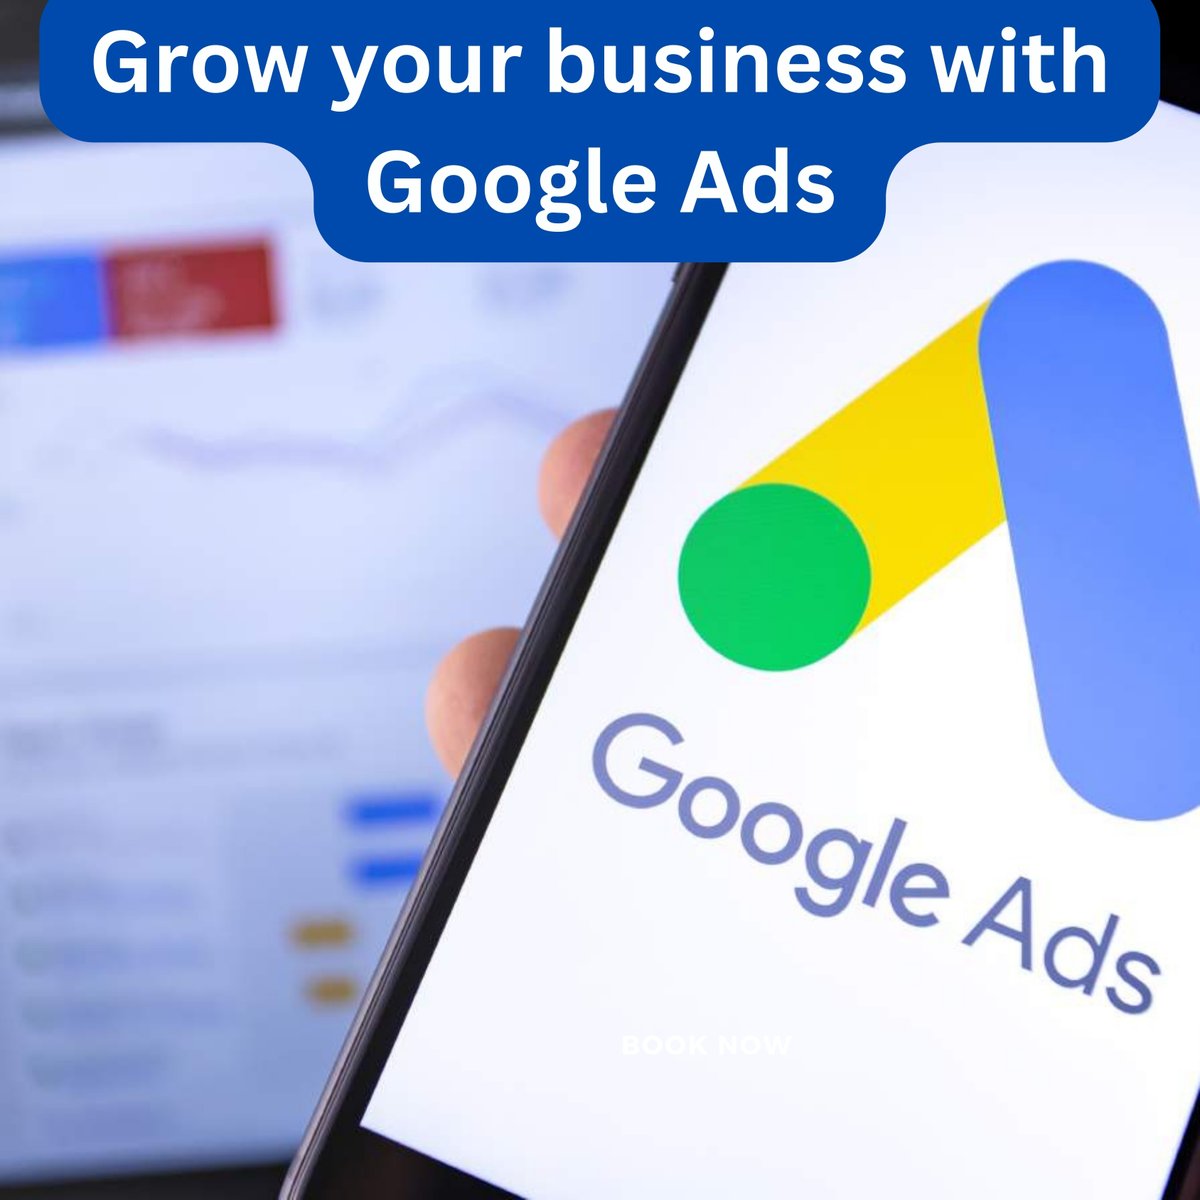 Advertise on Google Search, YouTubeand more. Reach potential customers looking for you.

#GoogleAds
#YouTubeAds
#DigitalMarketing
#OnlineAdvertising
#PPC
#SEM
#SearchAdvertising
#AdCampaign
#TargetedAds
#MarketingStrategy
#OnlineMarketing
#GrowYourBusiness
#AdvertisingTips